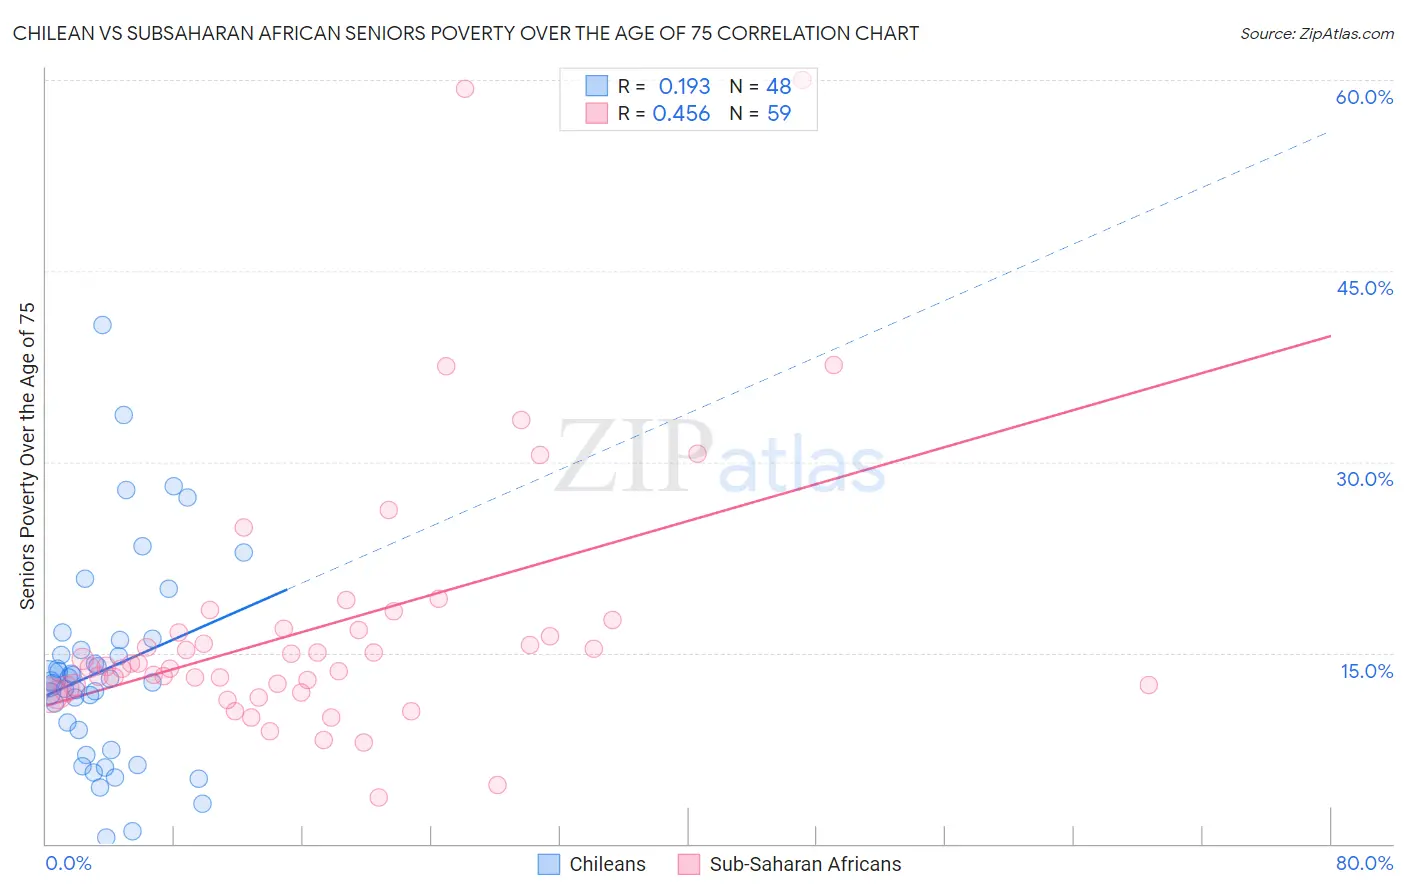 Chilean vs Subsaharan African Seniors Poverty Over the Age of 75